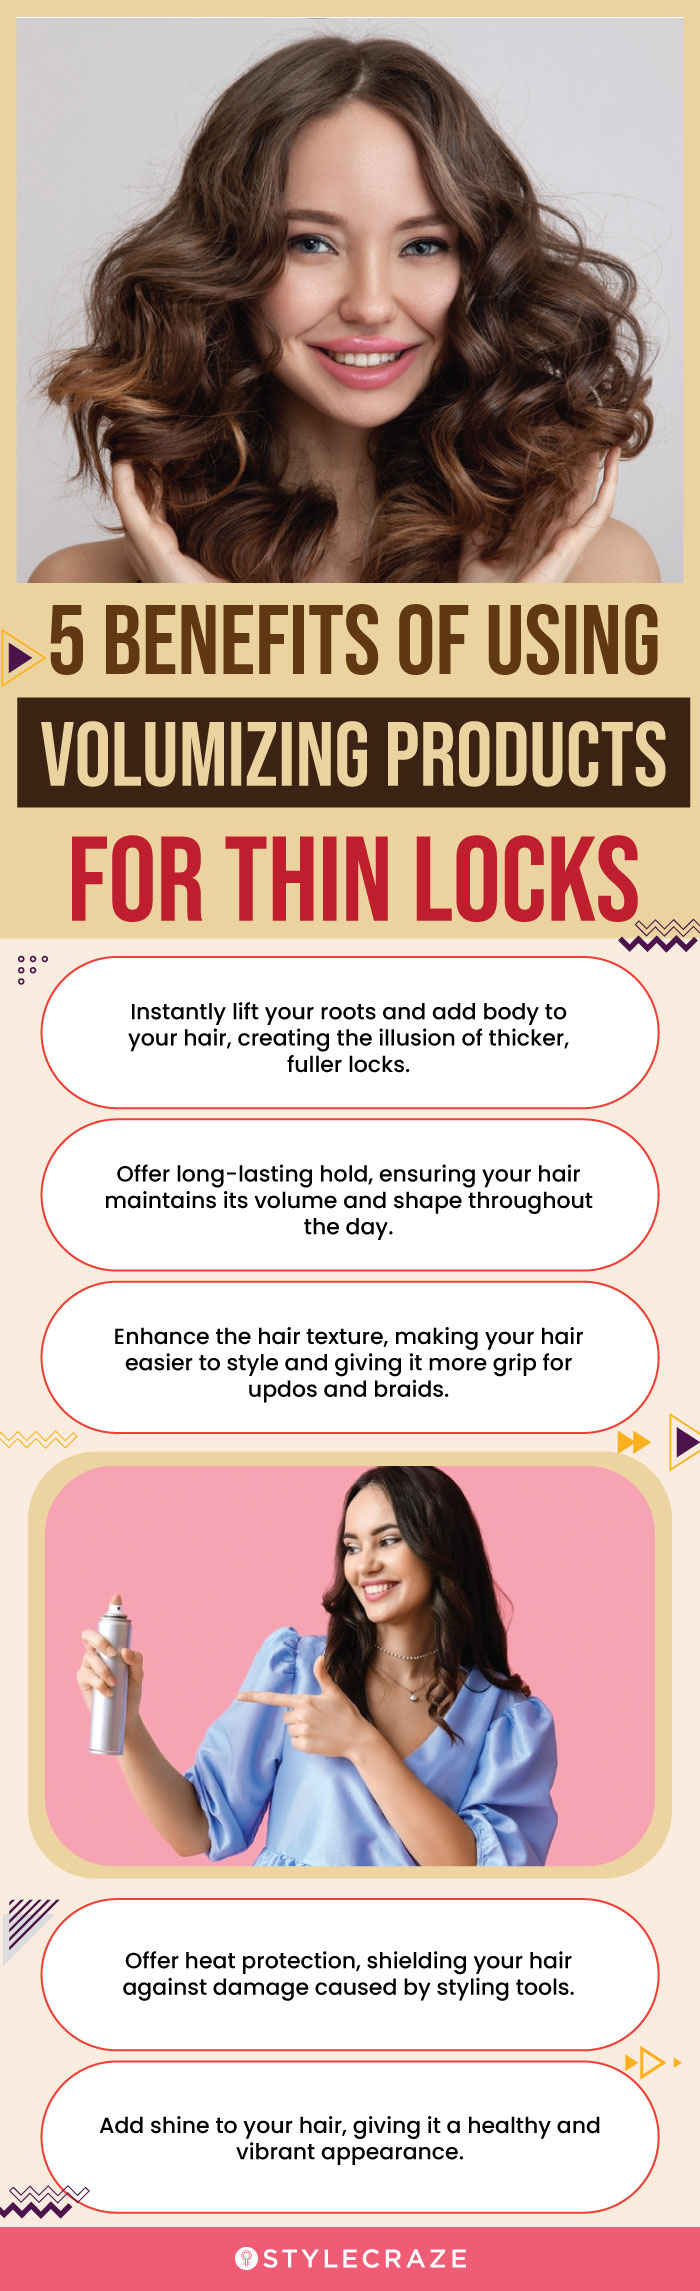 5 Benefits Of Using Volumizing Products For Thin Locks (infographic)